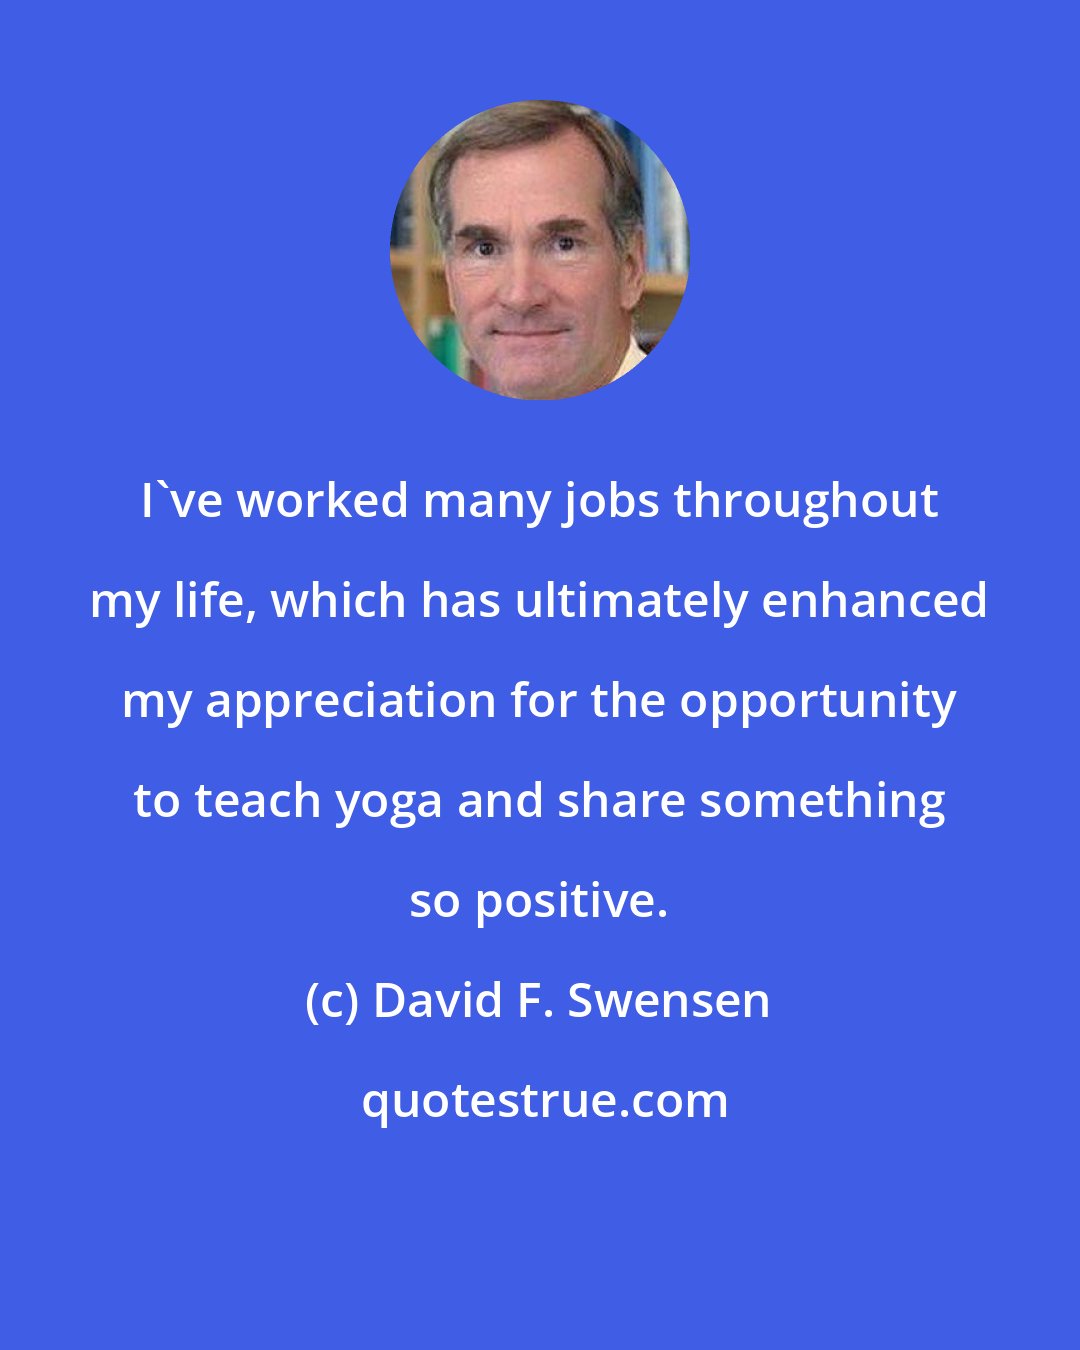 David F. Swensen: I've worked many jobs throughout my life, which has ultimately enhanced my appreciation for the opportunity to teach yoga and share something so positive.